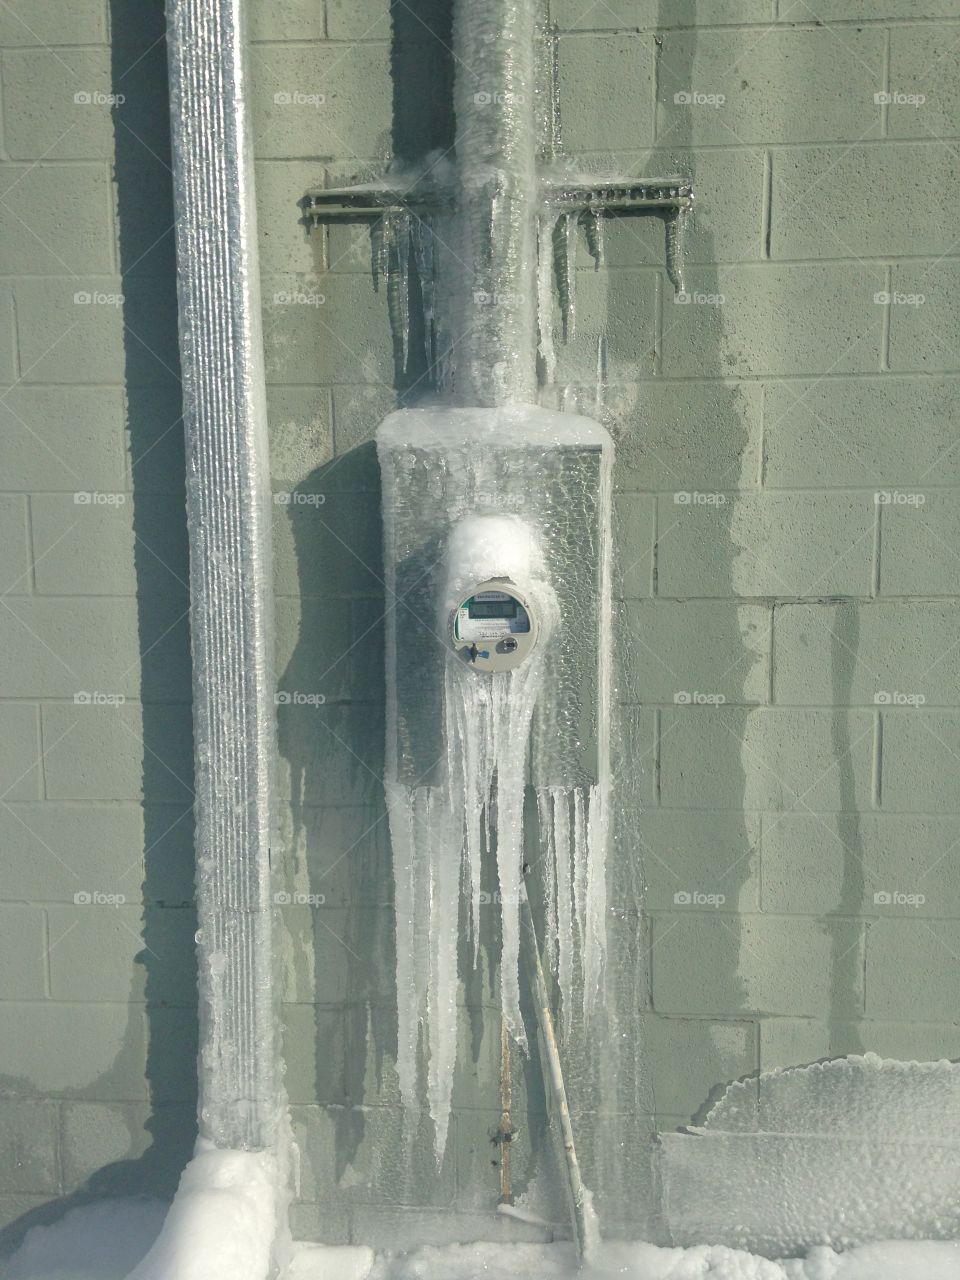 Nature vs Technology. Ice takes over an electric meter 